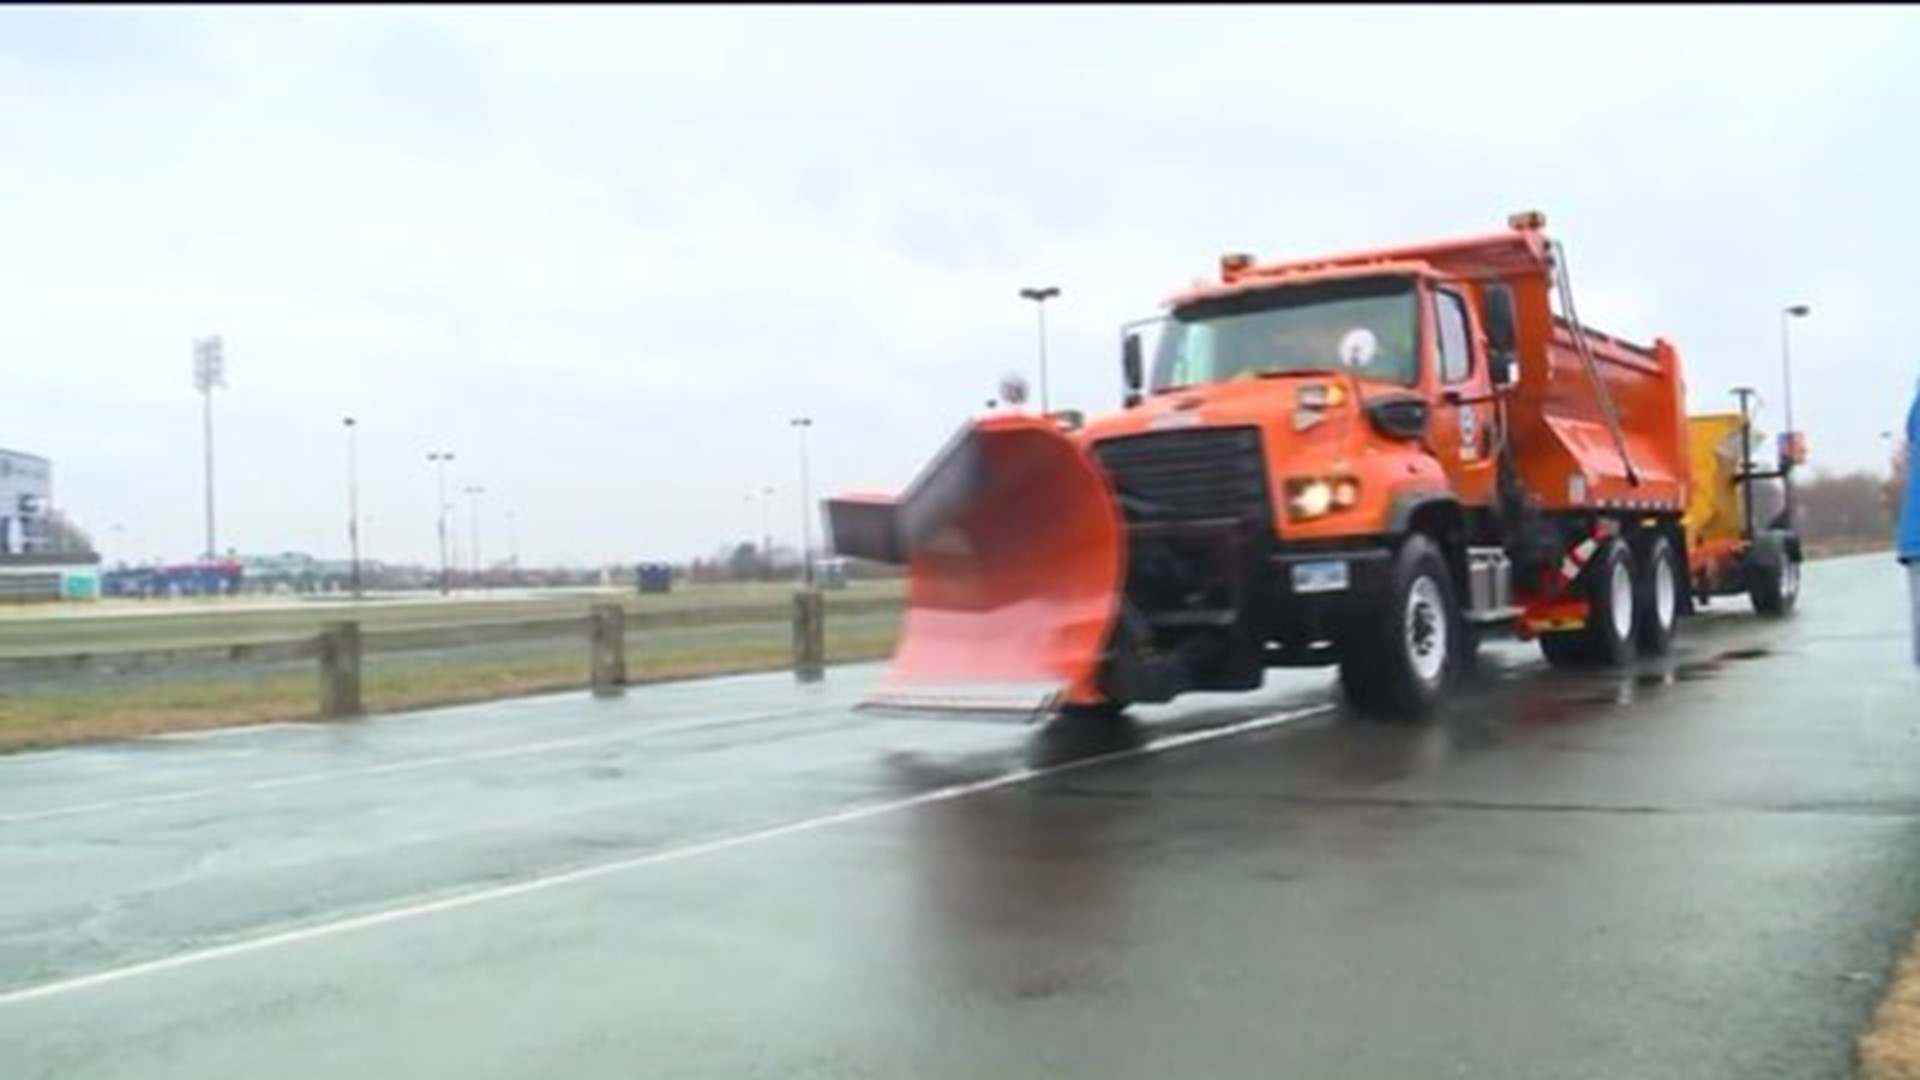 Getting the plows ready